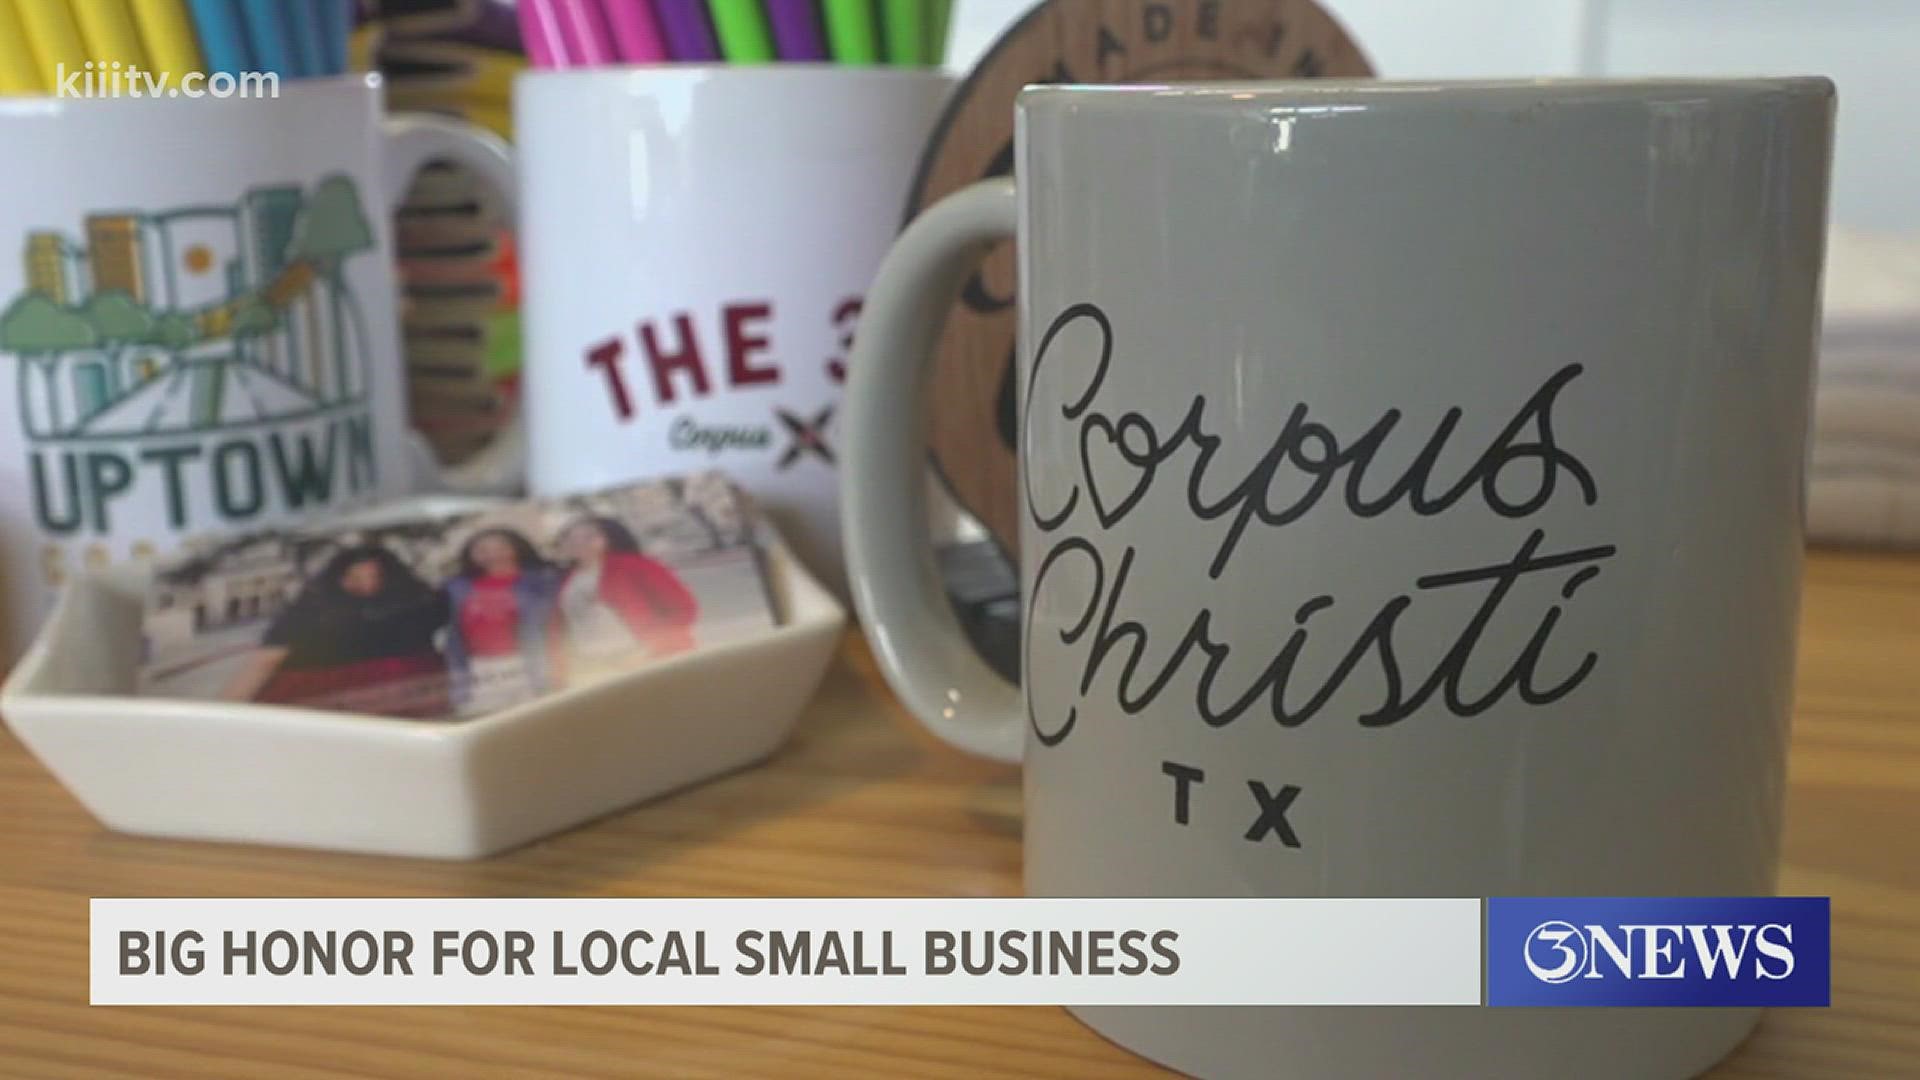 According to Riojas, her organization carries products from over 30 different small businesses in the Coastal Bend region.